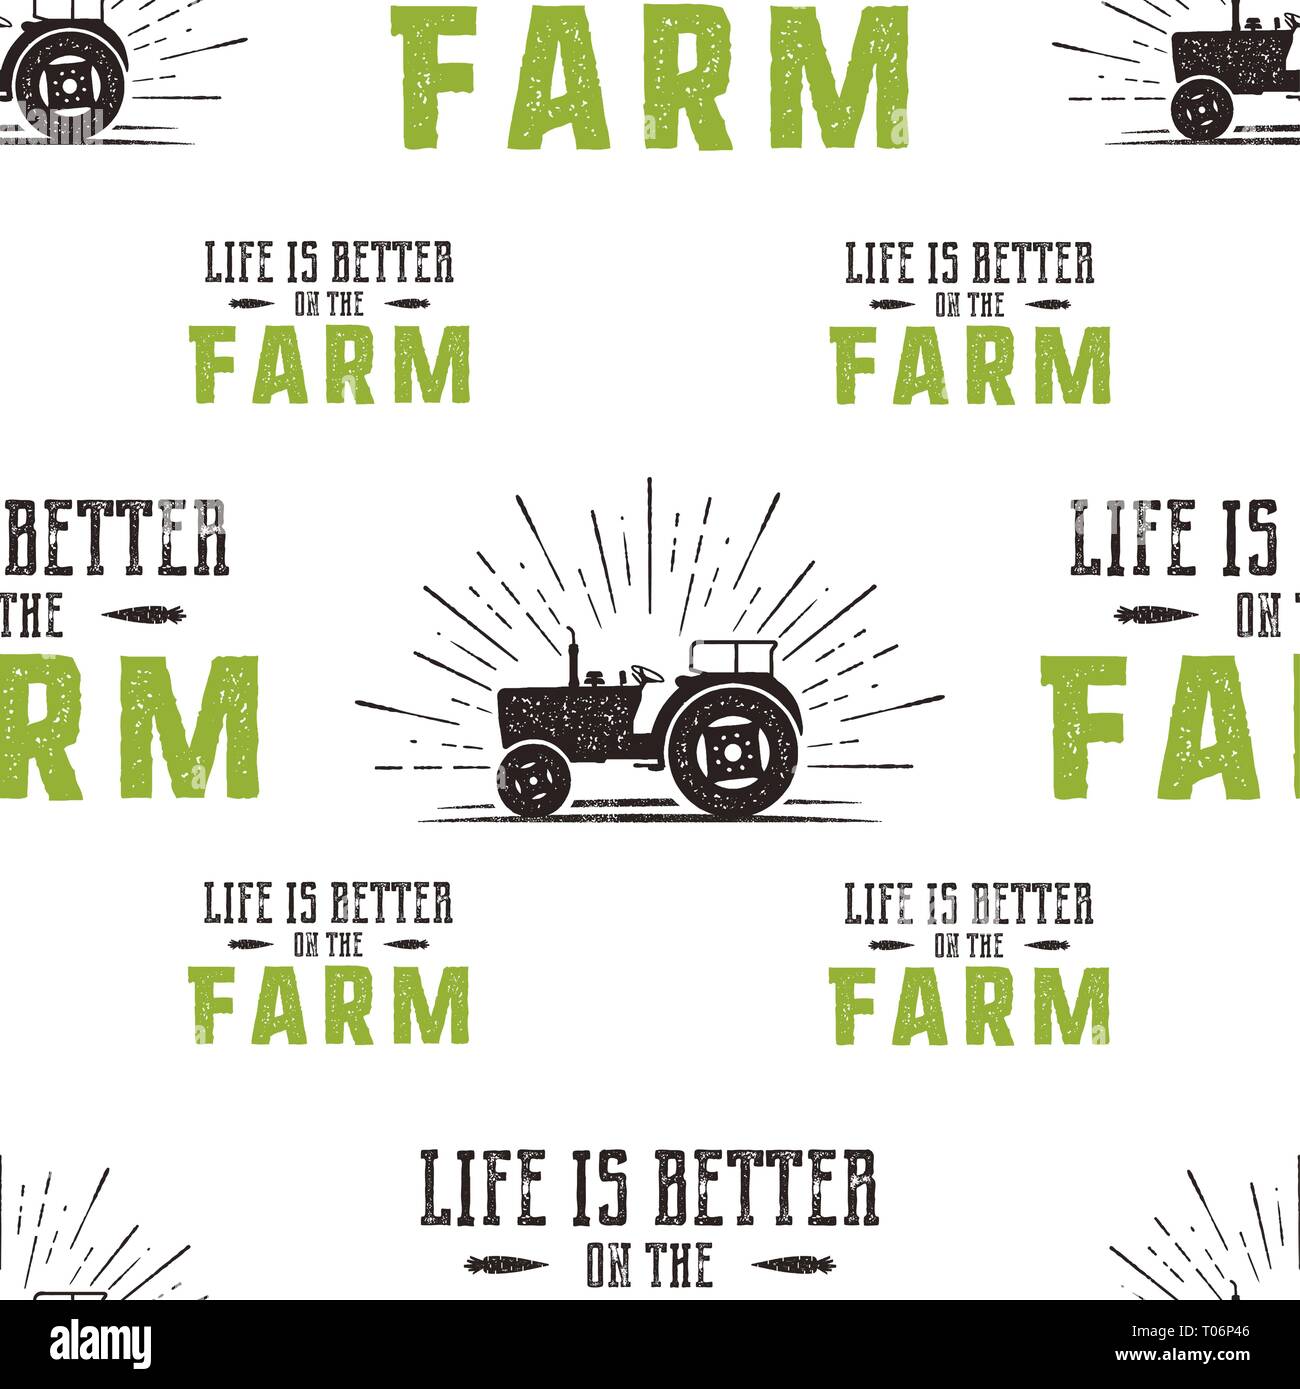 Farm seamless pattern design. Life is better on the Fatm quote and tractor in retro distressed style. Green and brown trendy colors. Stock vector Stock Vector